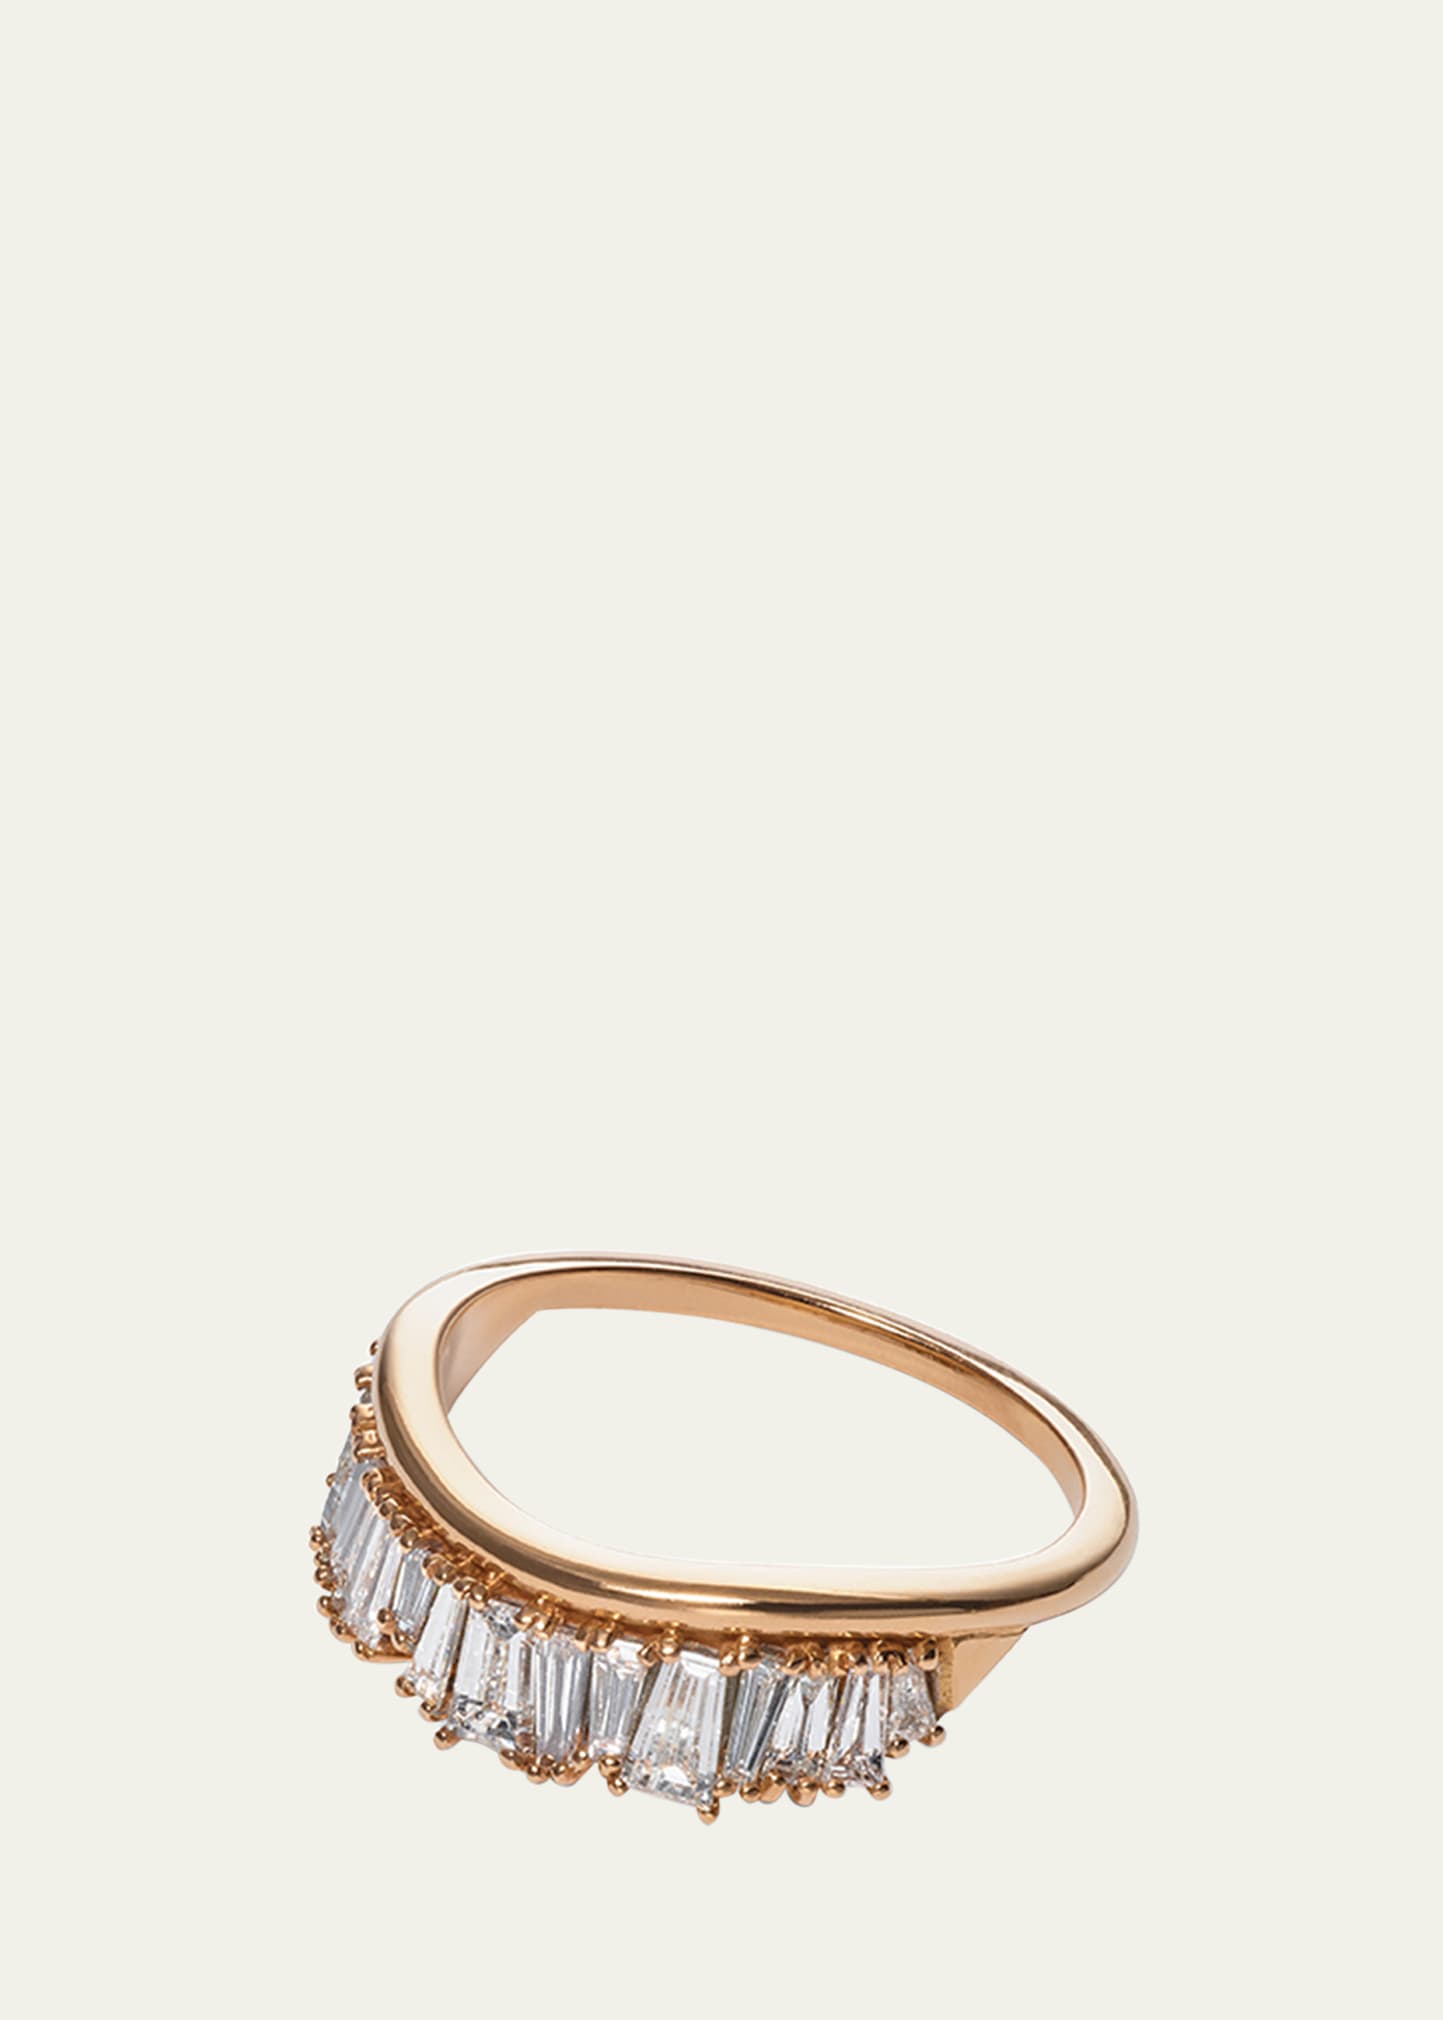 20K Rose Gold Ruched Diamond Ring with White Diamonds